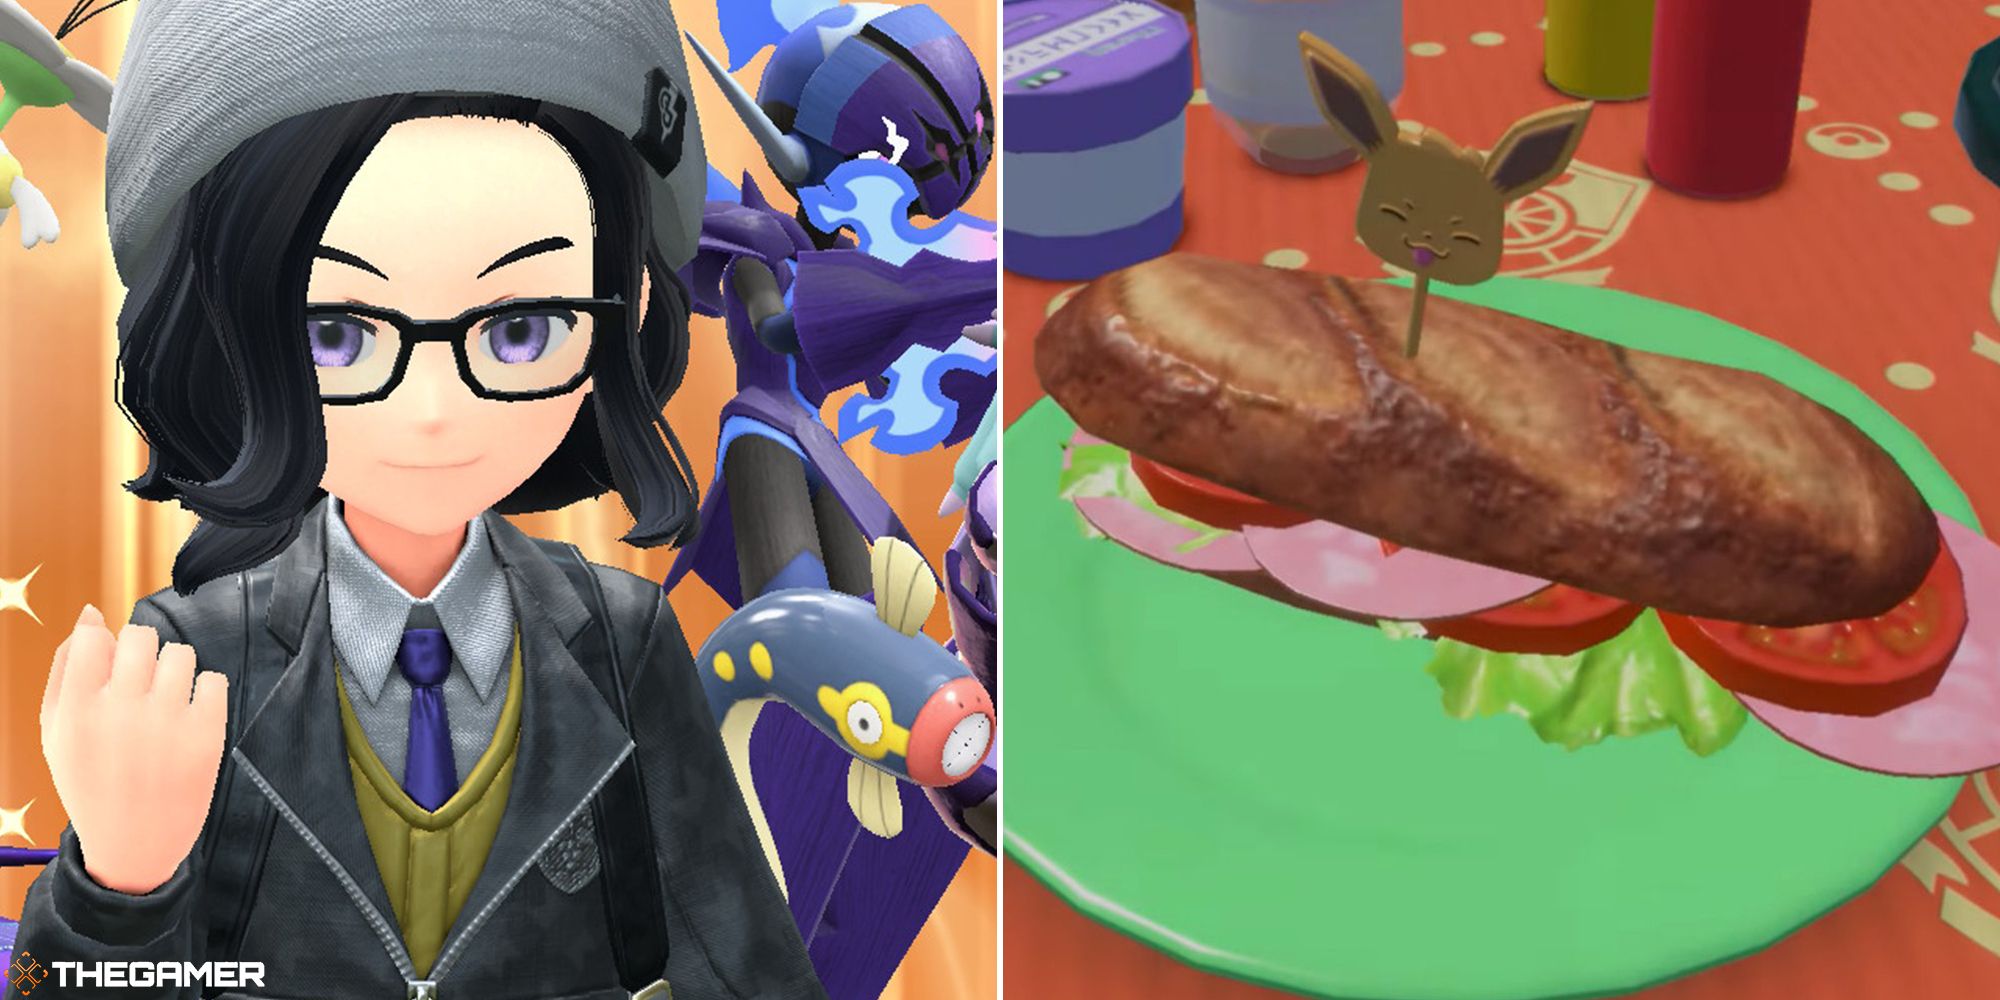 All Egg Power Sandwiches and their recipes in Pokemon Scarlet and Violet